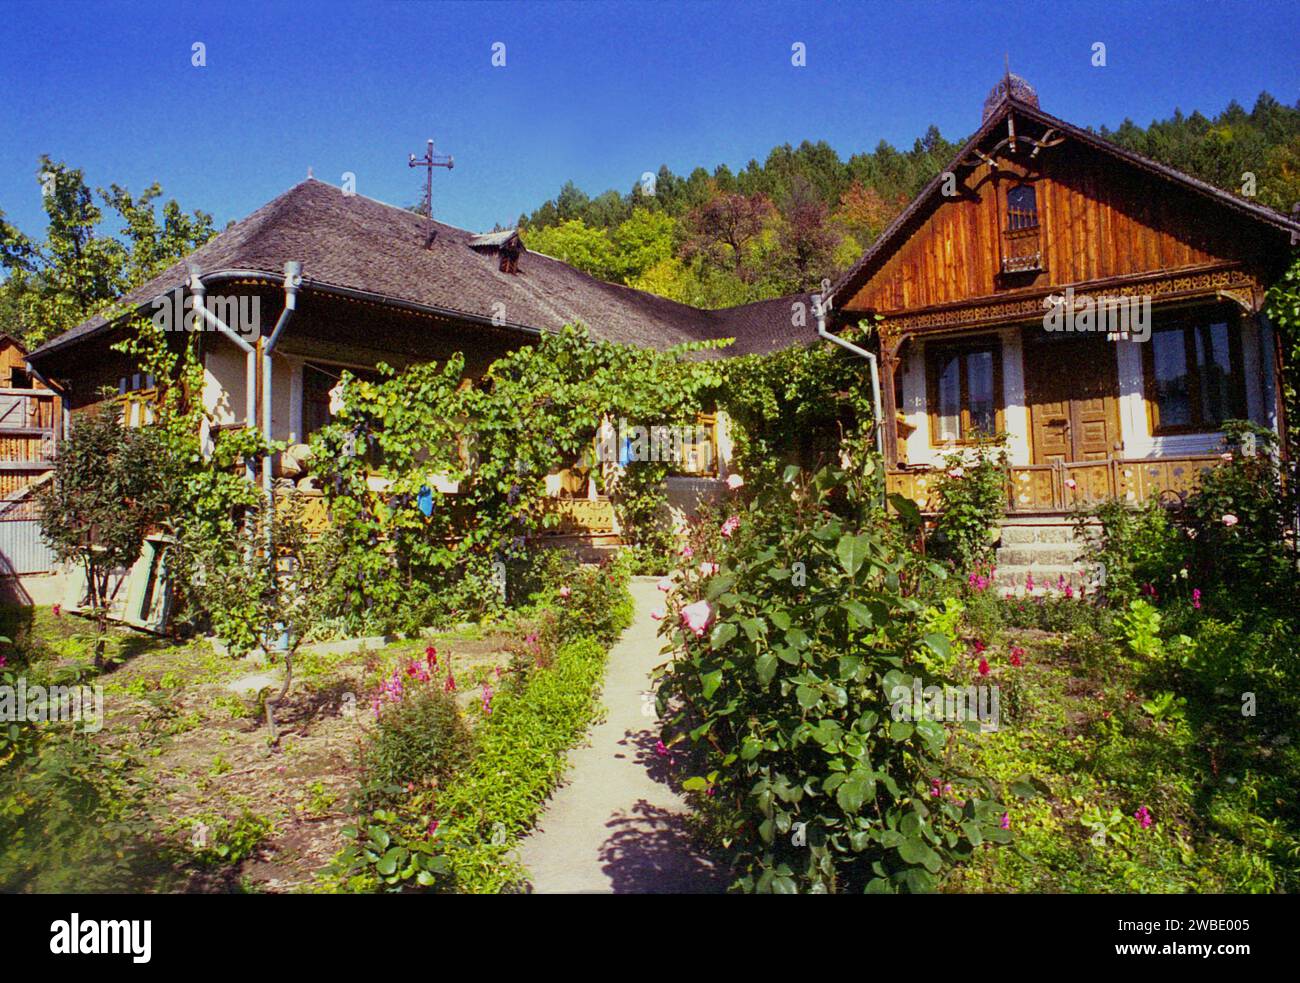 Homestead with two traditional houses in Negrileşti, Vrancea County, Romania, approx. 2001 Stock Photo